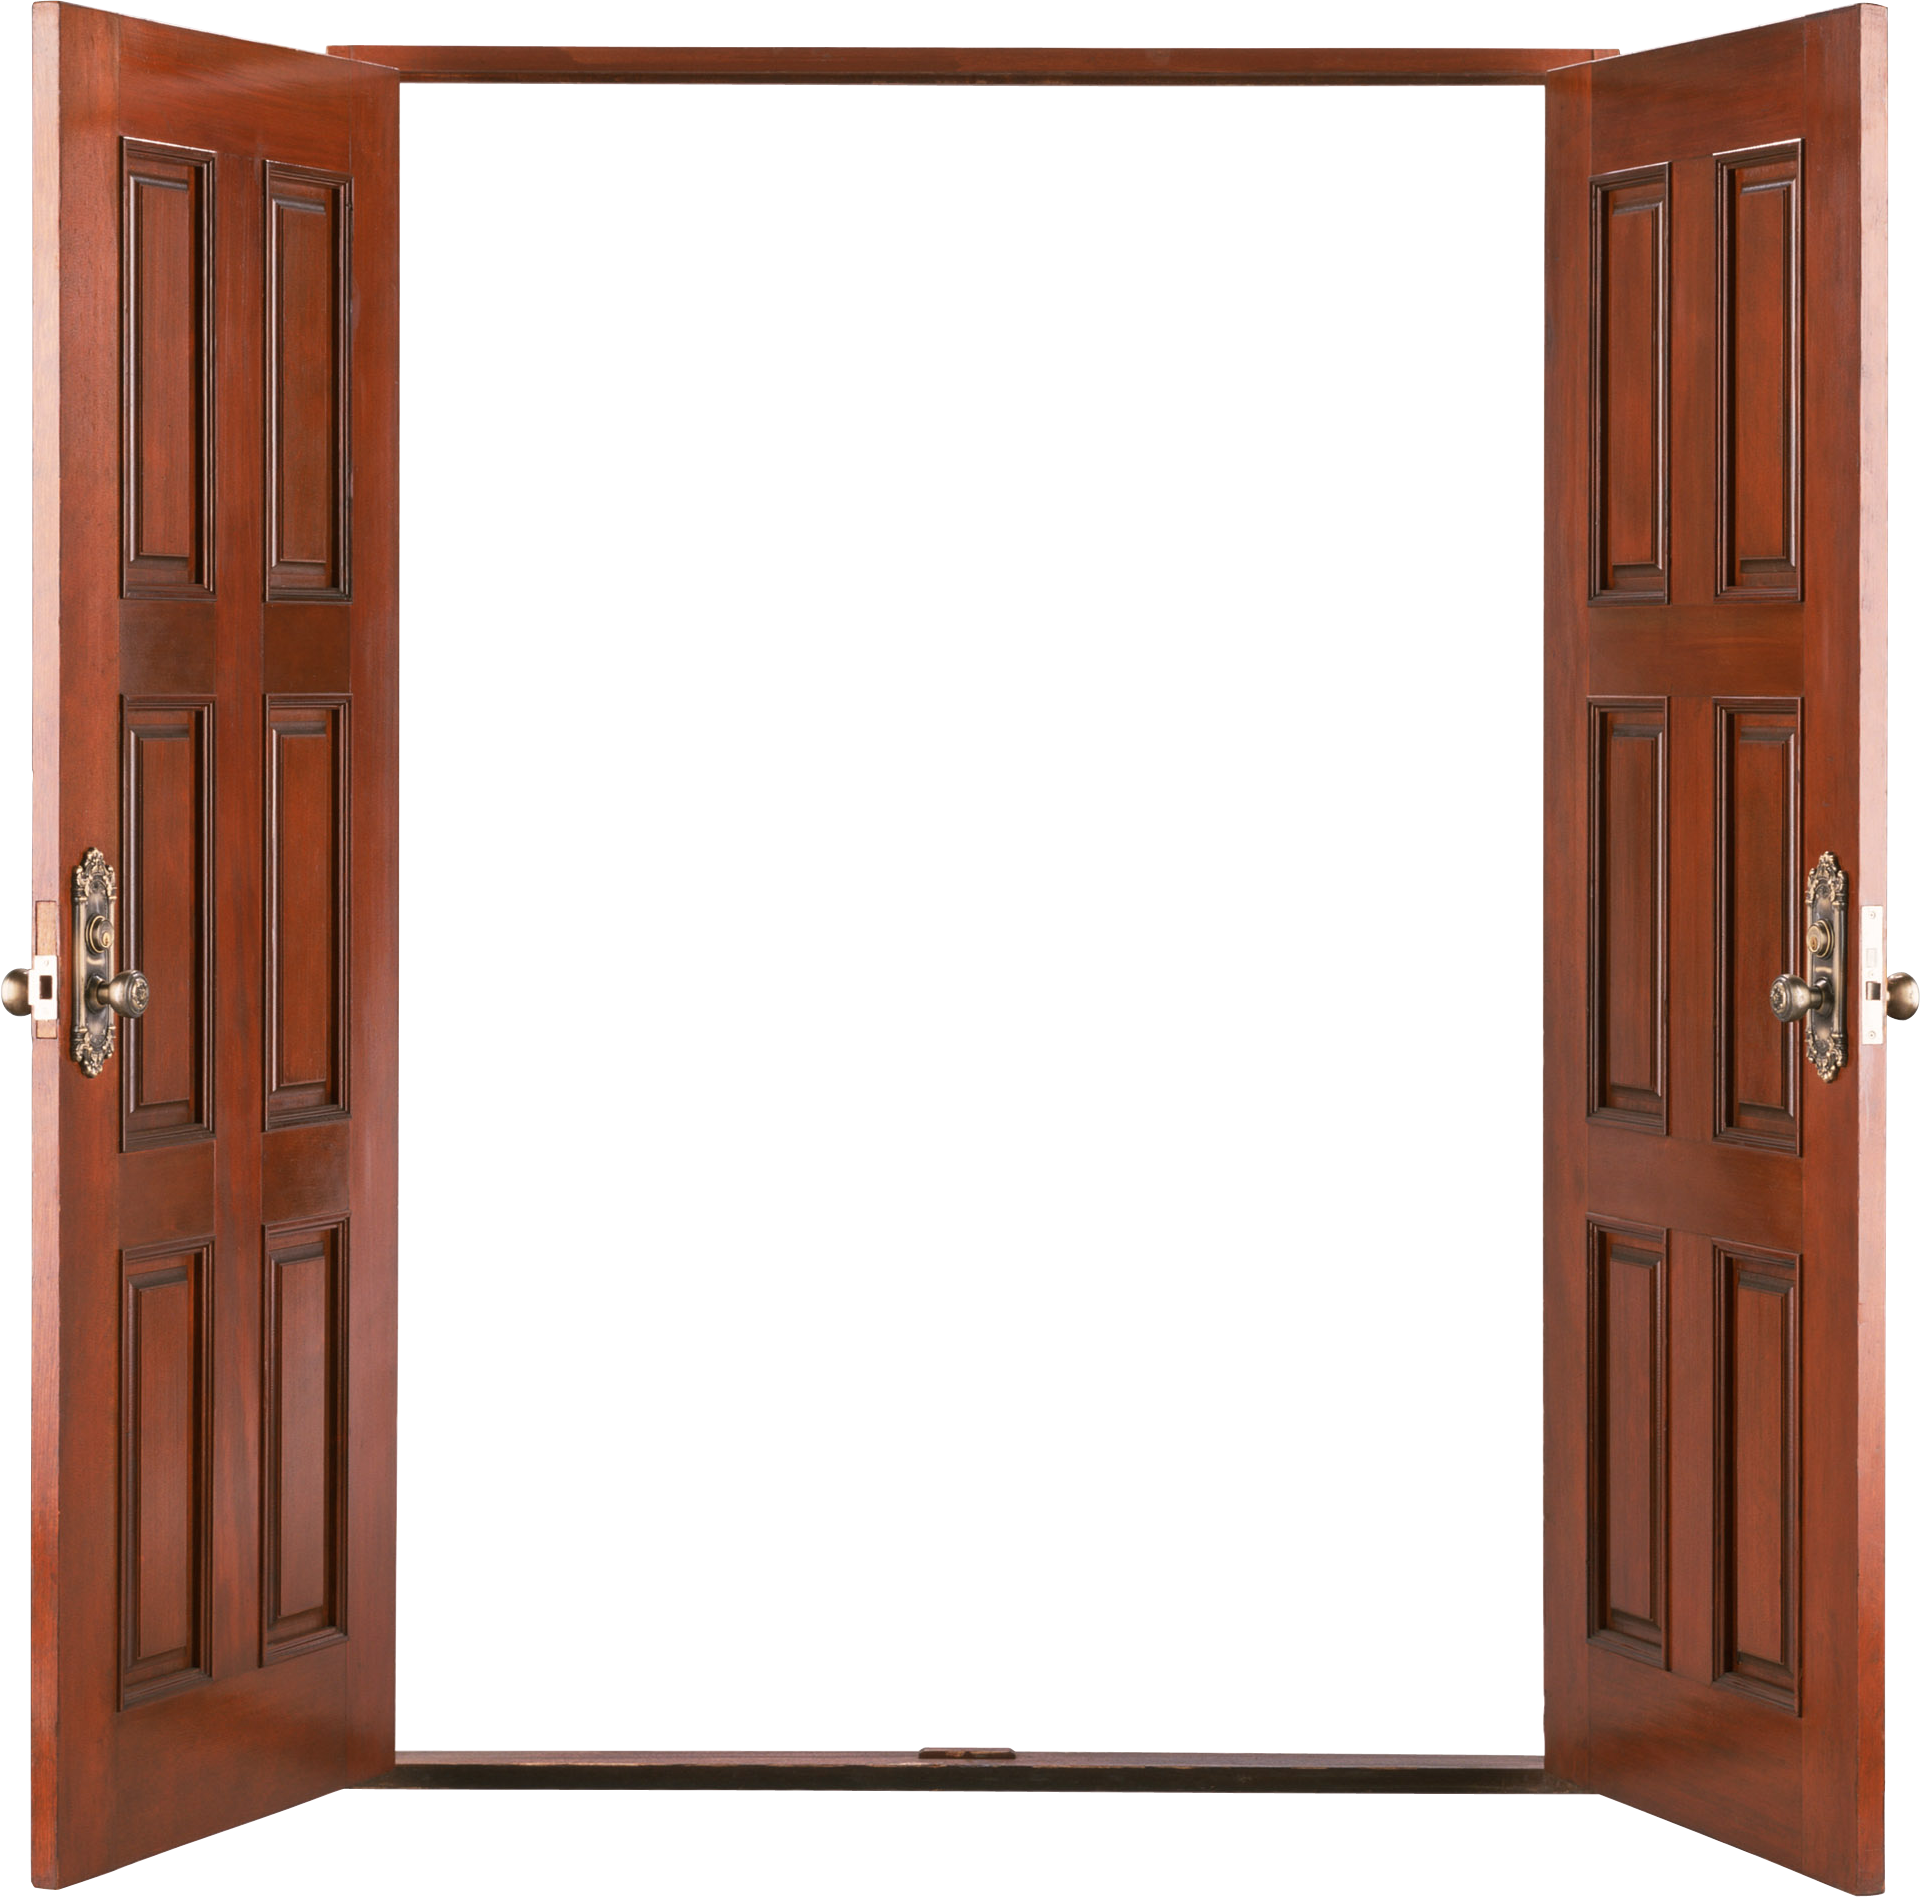 Gate Open Download Free Image PNG Image